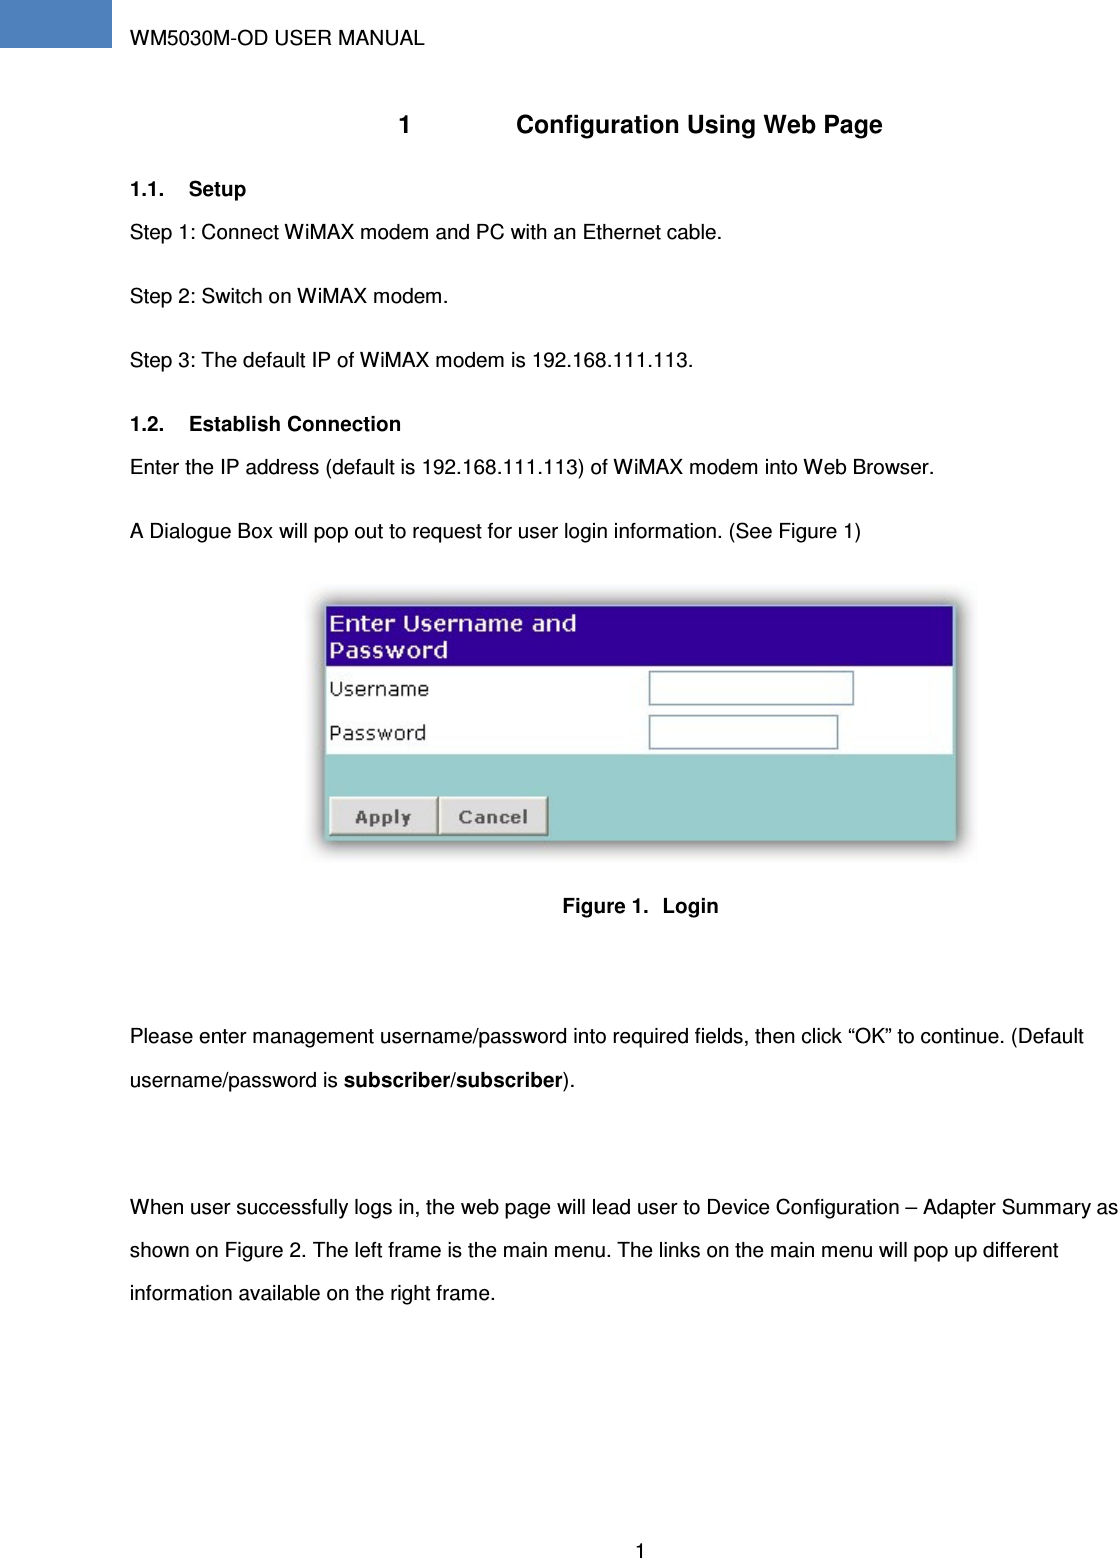 WM5030M-OD USER MANUAL 1    1  Configuration Using Web Page 1.1.  Setup Step 1: Connect WiMAX modem and PC with an Ethernet cable. Step 2: Switch on WiMAX modem.   Step 3: The default IP of WiMAX modem is 192.168.111.113. 1.2.  Establish Connection Enter the IP address (default is 192.168.111.113) of WiMAX modem into Web Browser. A Dialogue Box will pop out to request for user login information. (See Figure 1)  Figure 1.  Login  Please enter management username/password into required fields, then click “OK” to continue. (Default username/password is subscriber/subscriber).  When user successfully logs in, the web page will lead user to Device Configuration – Adapter Summary as shown on Figure 2. The left frame is the main menu. The links on the main menu will pop up different information available on the right frame. 